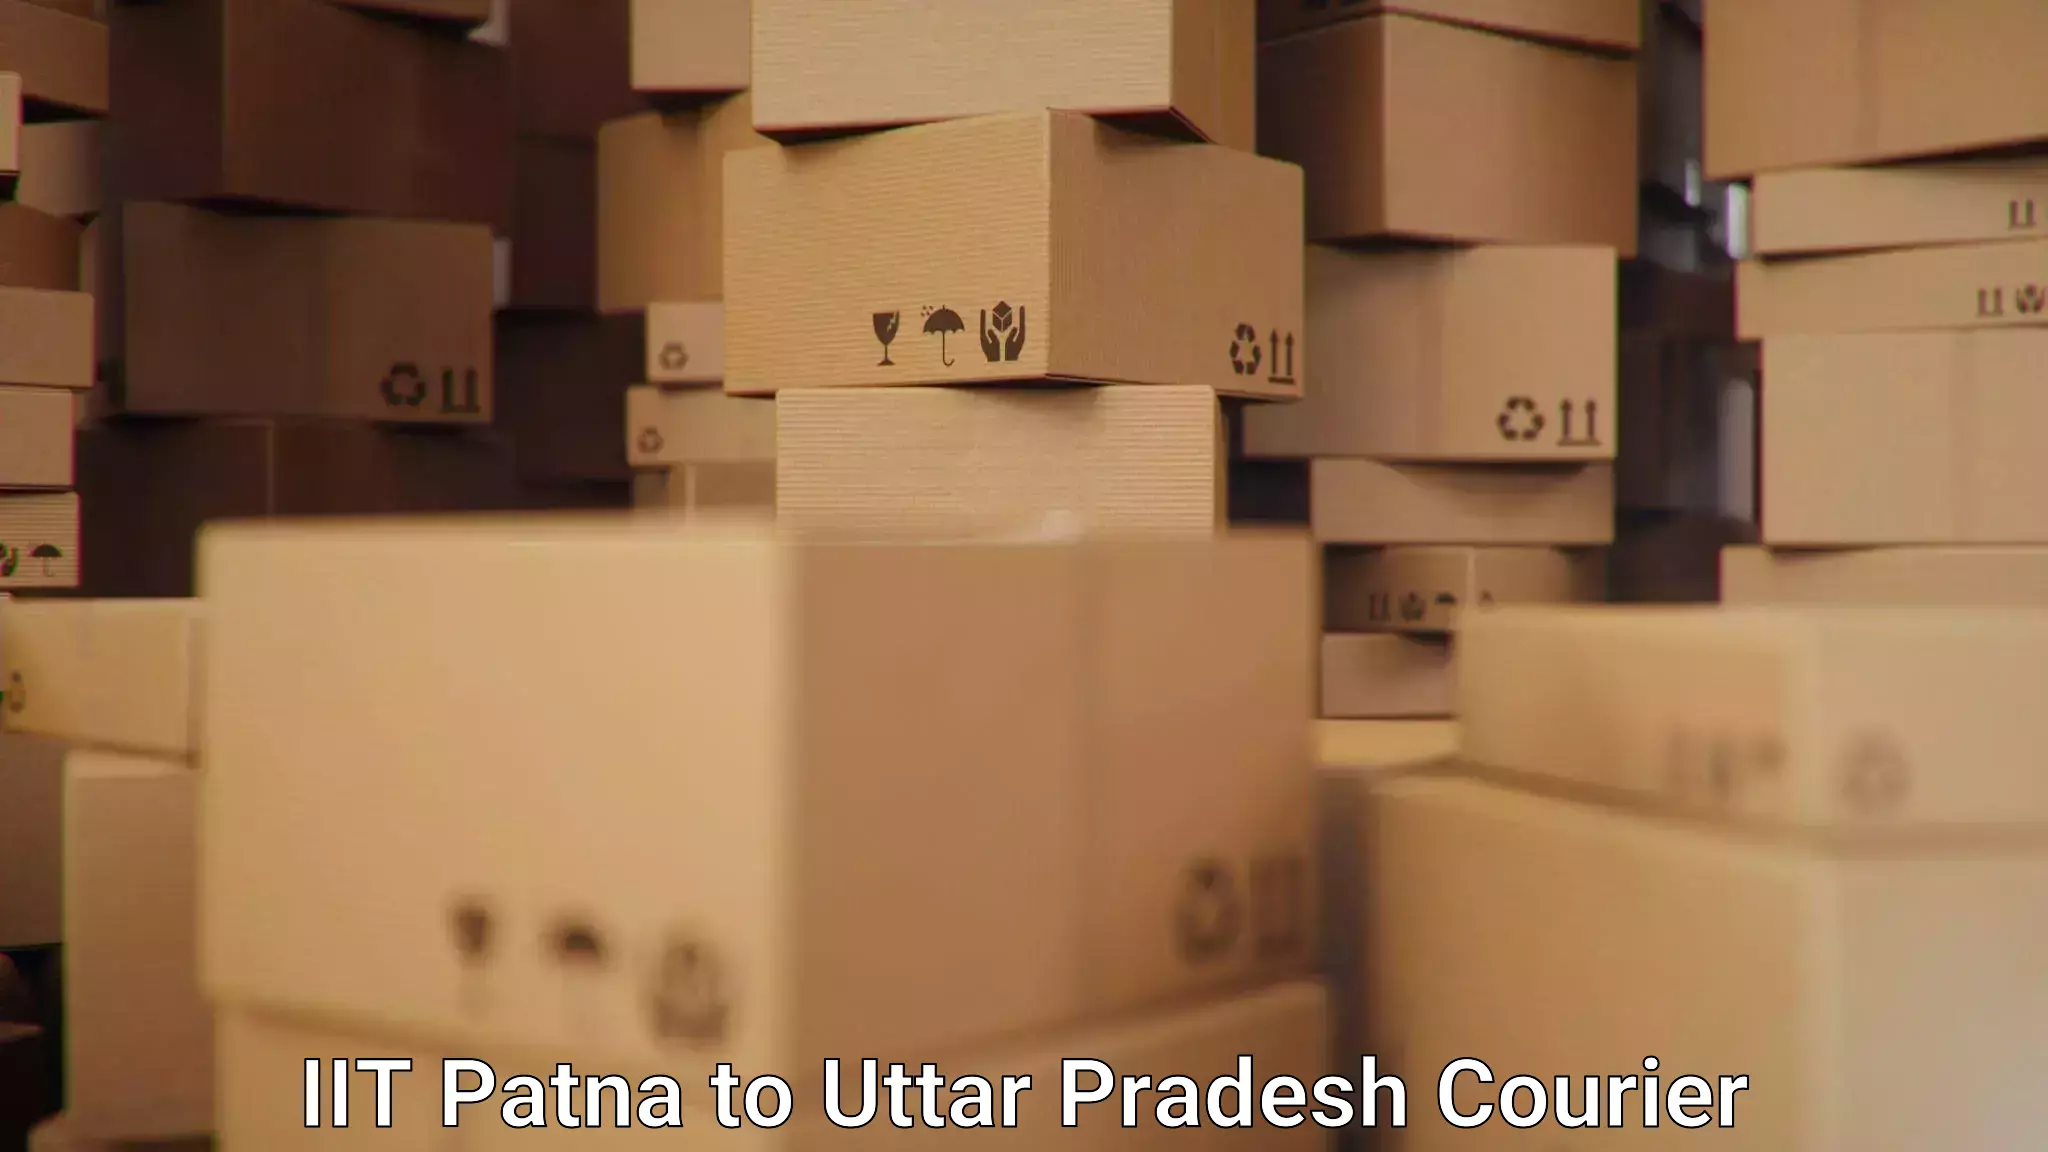 Weekend courier service IIT Patna to Ayodhya